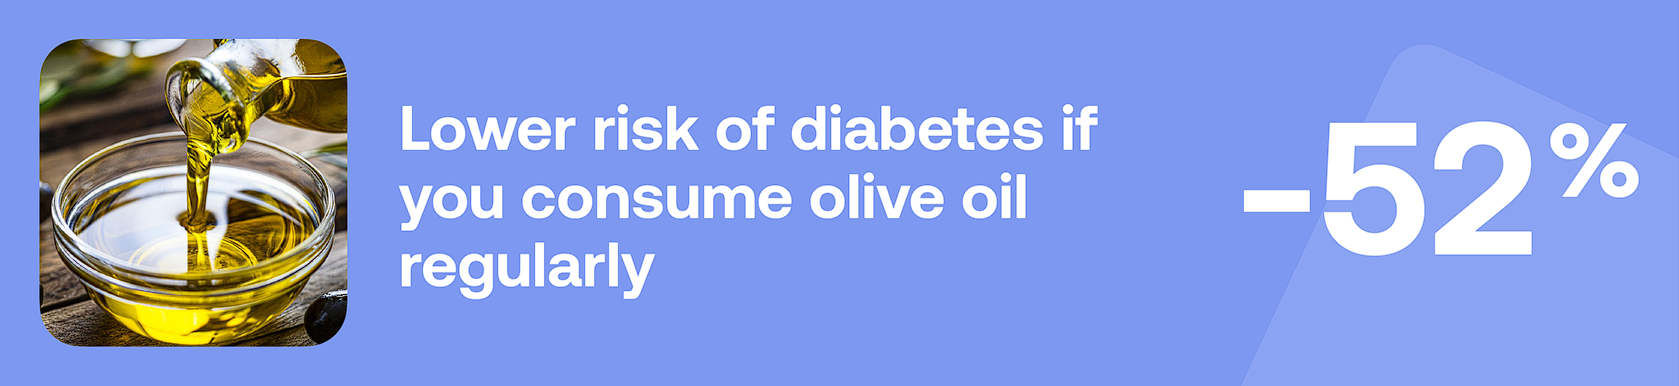 Lower risk of diabetes if you consume olive oil regularly -52%